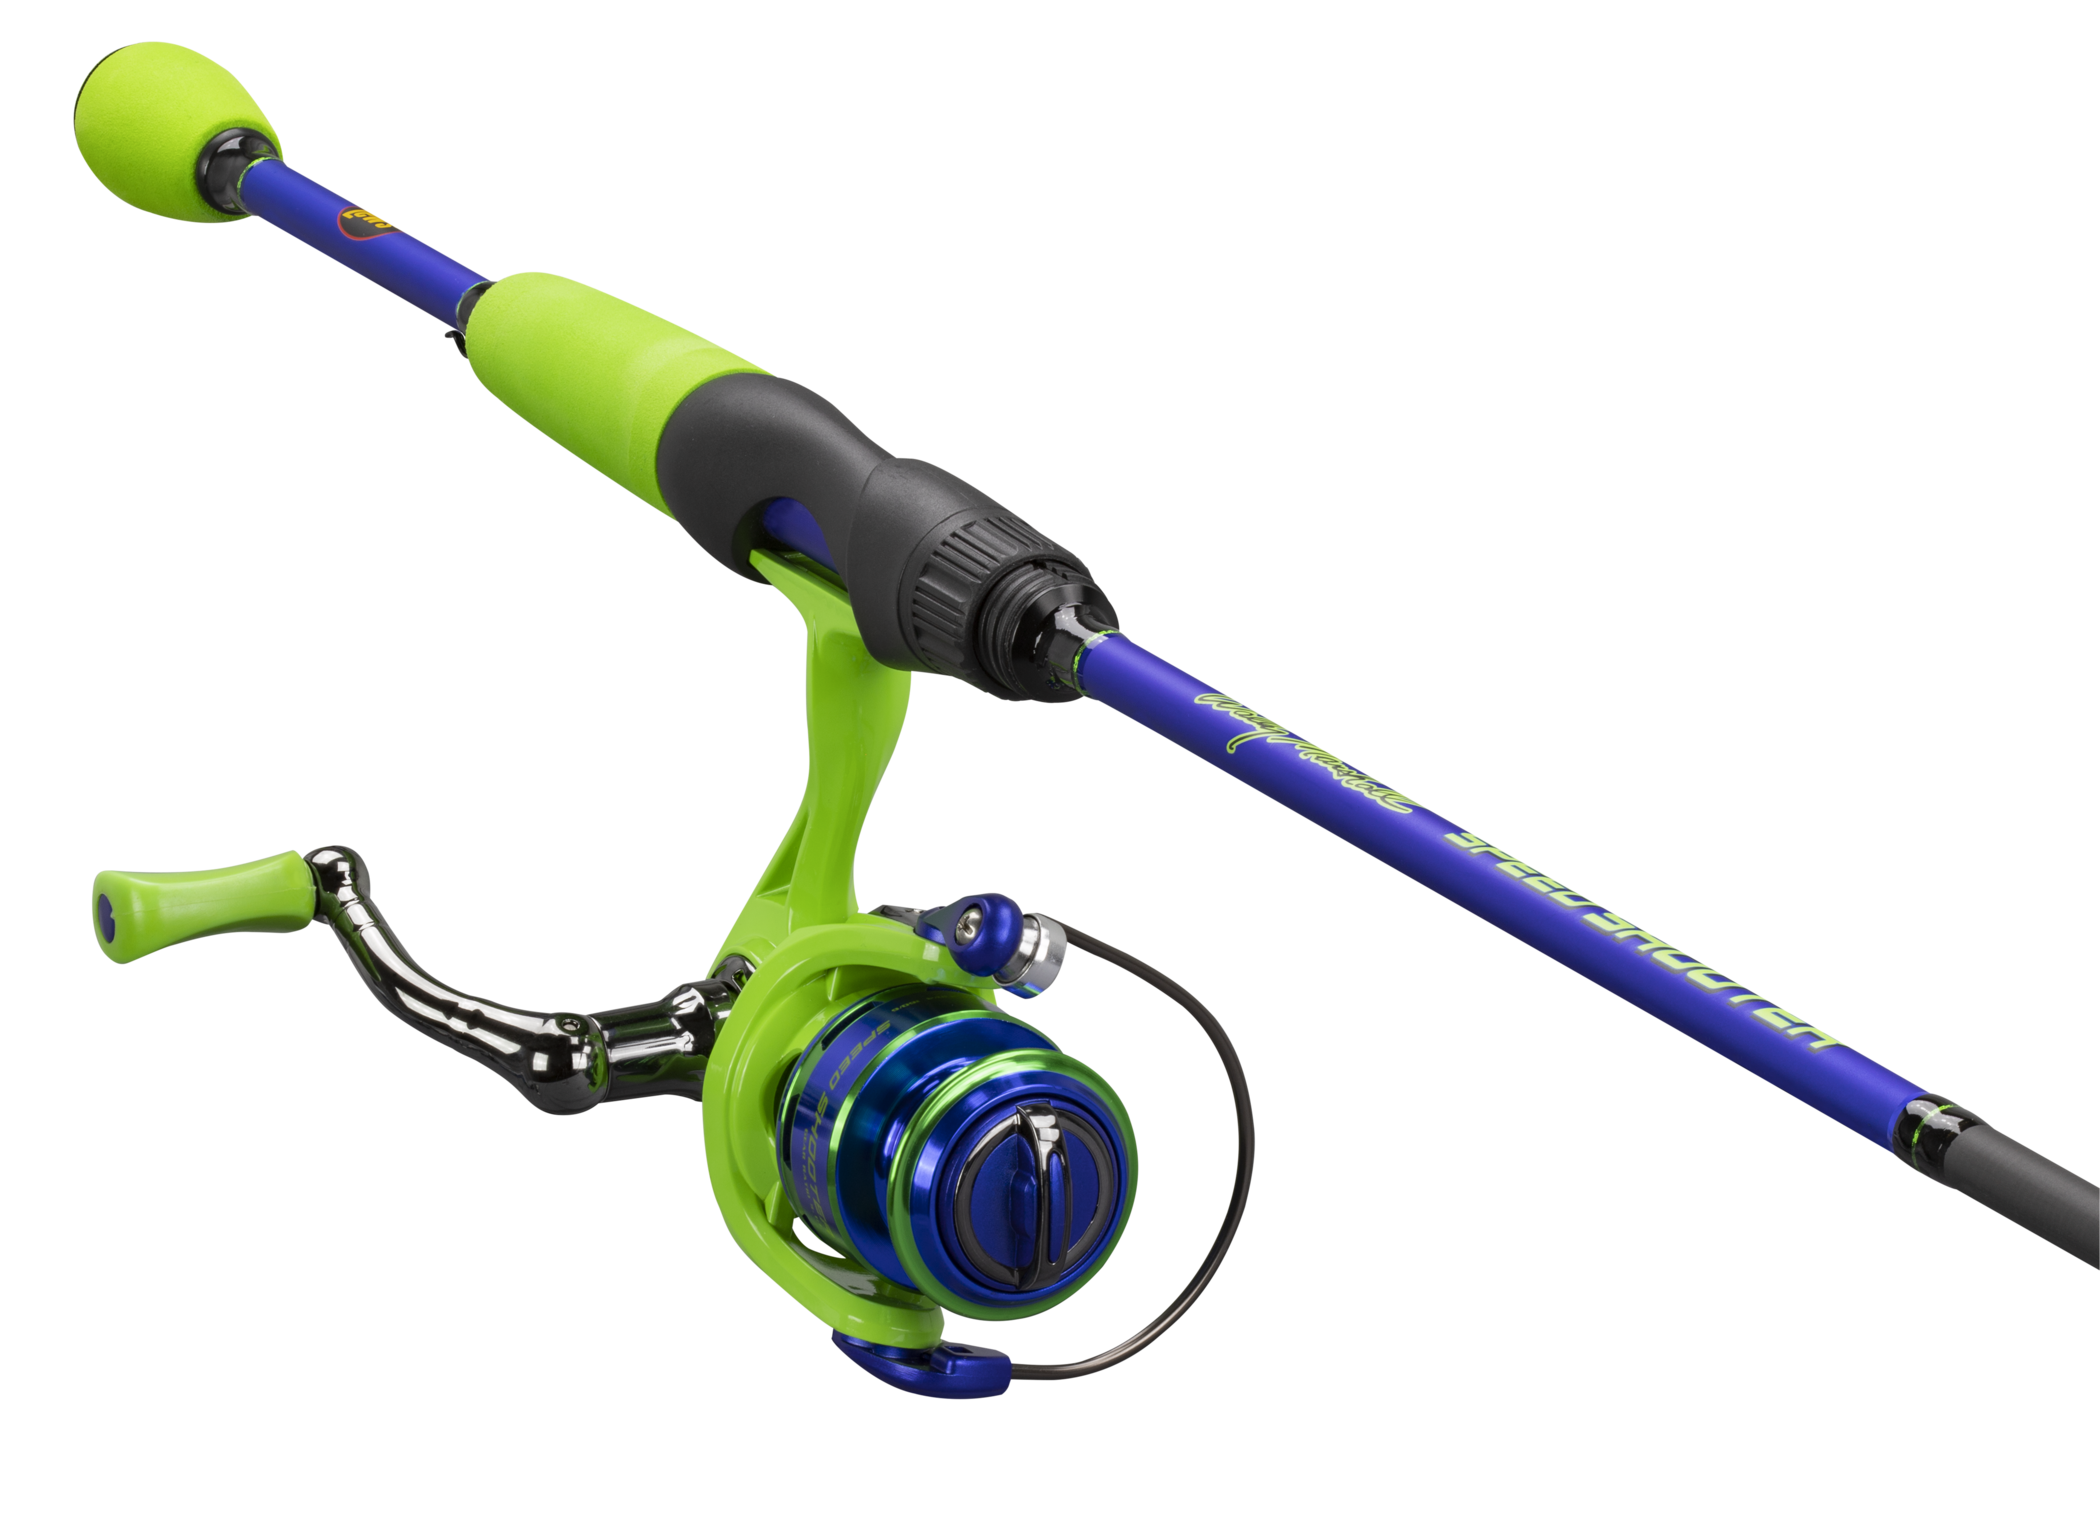 Lew's Wally Marshall Speed Shooter Spinning Reel and Fishing Rod Combo,  6-Foot Rod, Size 100 Reel, Green/Blue